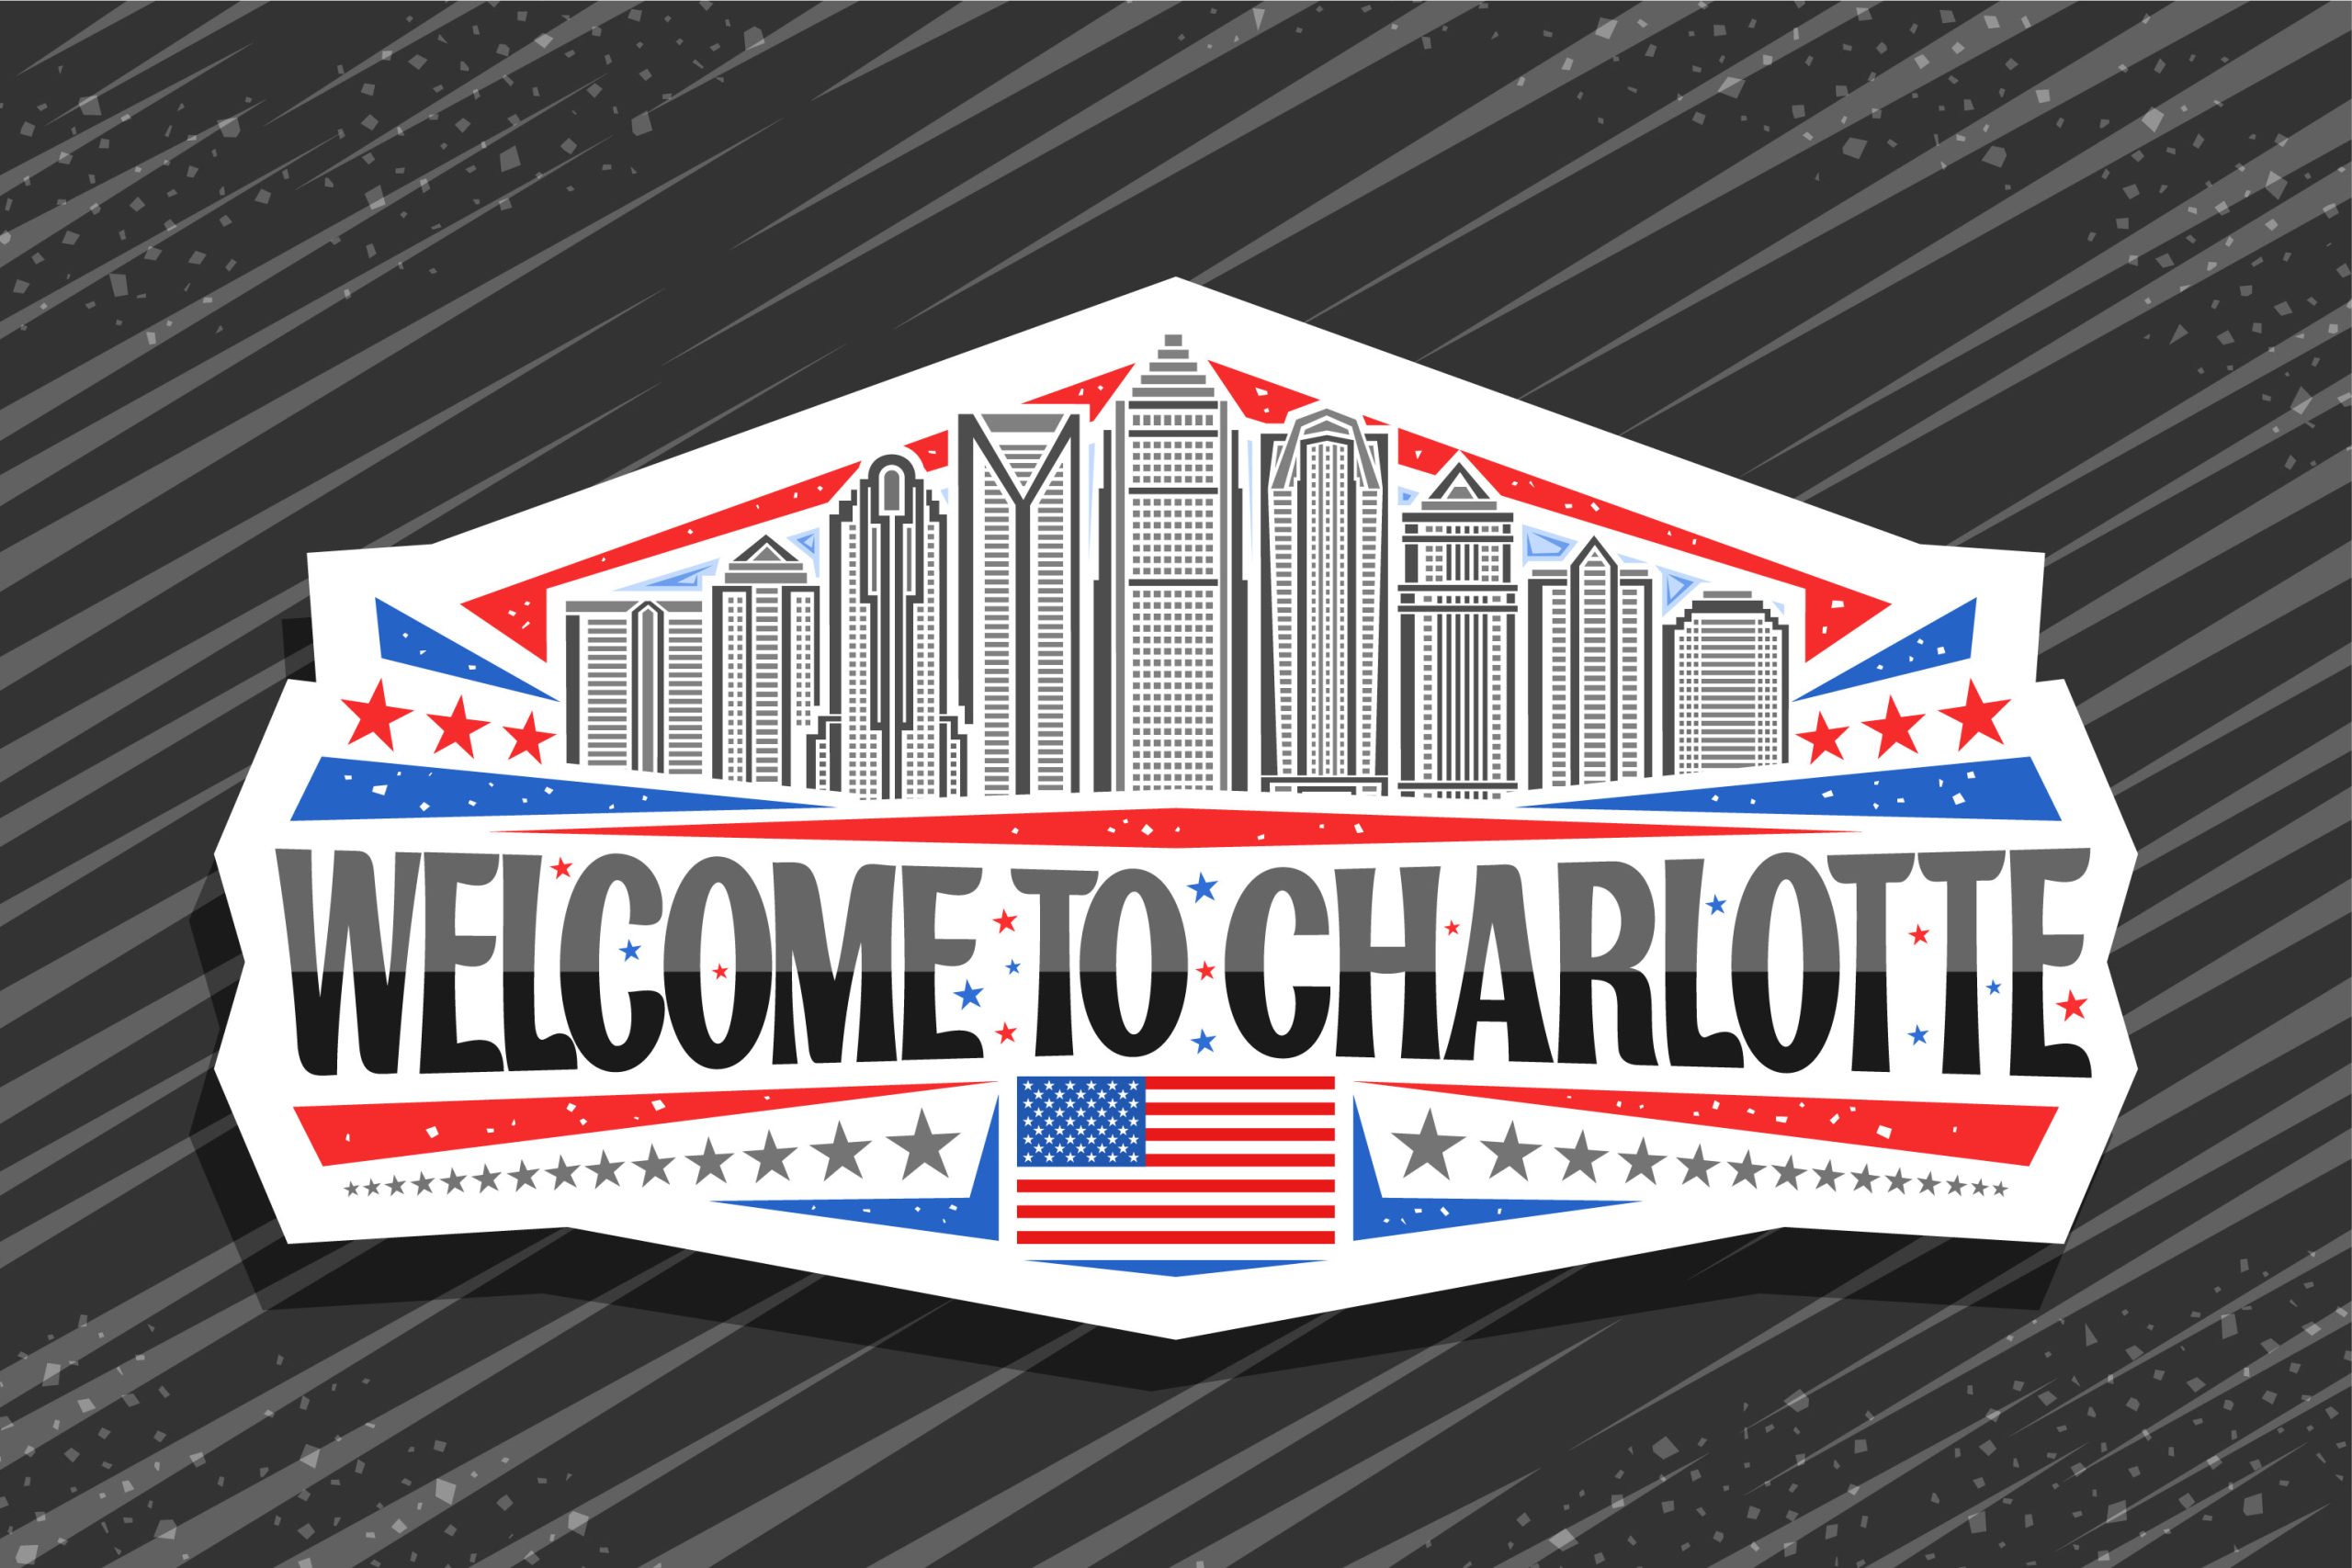 A badge featuring the Charlotte, NC cityscape with 'Welcome to Charlotte' text and the US flag below